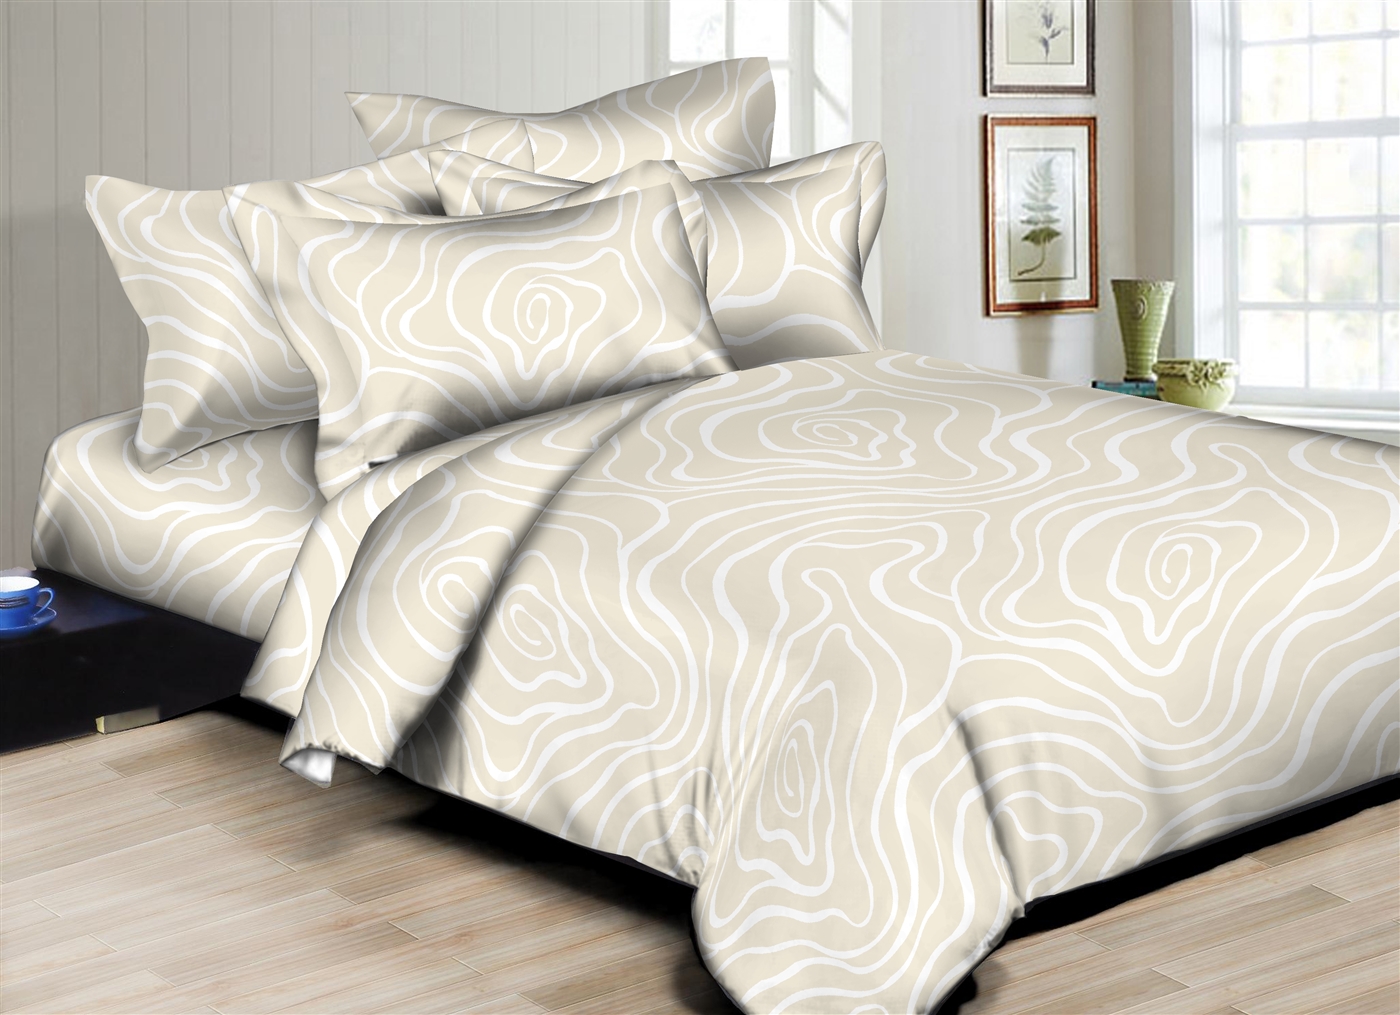 Better Bed Collection: New Dimension Beige 8PC Bedding Sets - 300 Thread Count